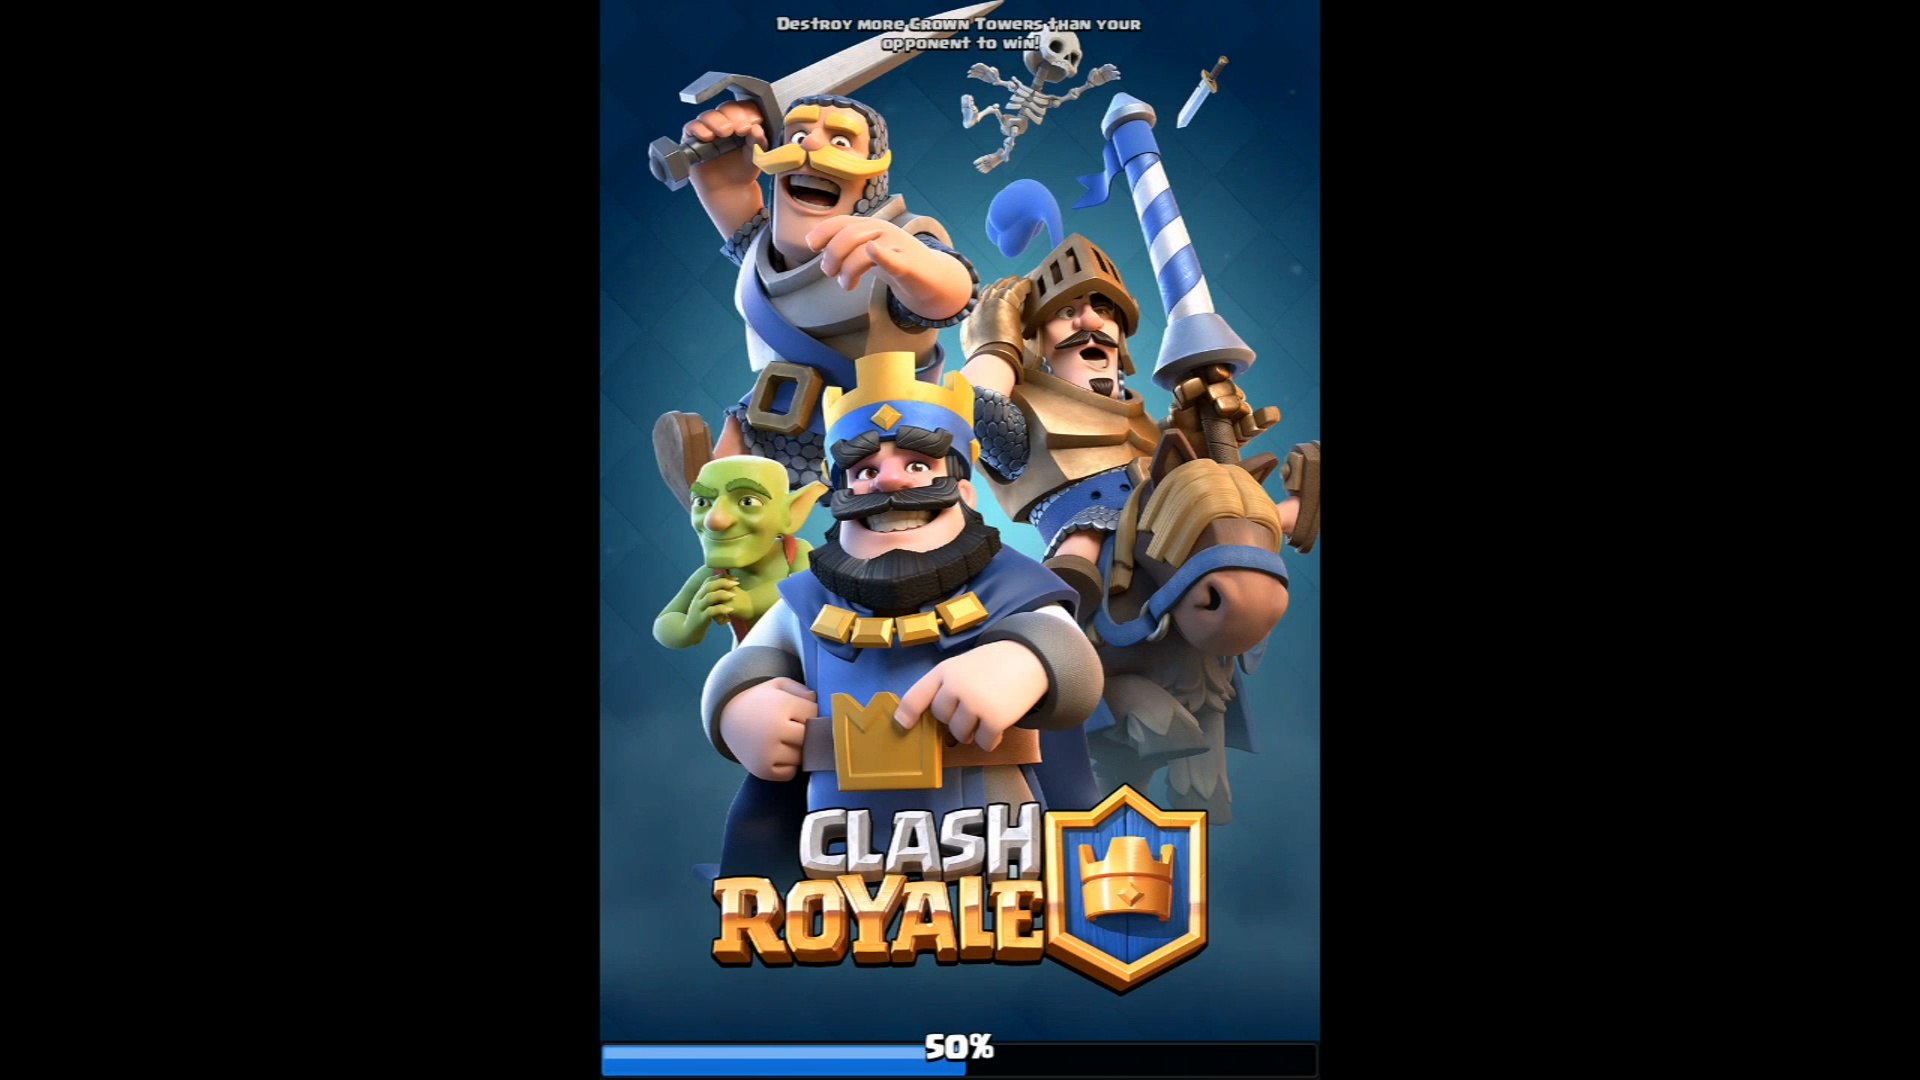 Download clash royale apk for android update 29th feb 2